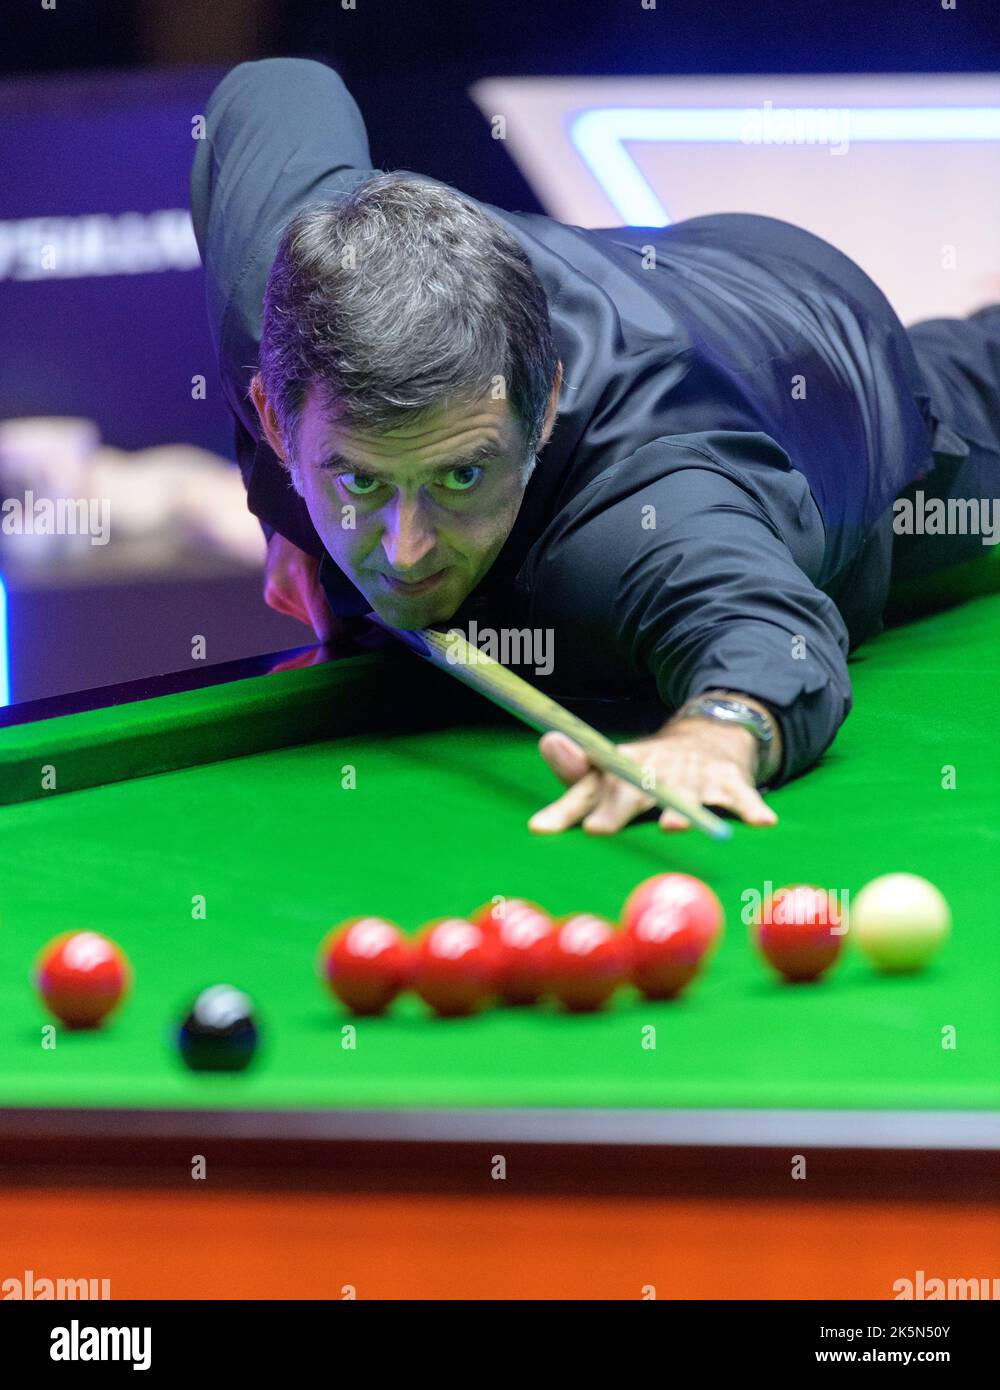 Hong Kong, China. 09th Oct, 2022. Ronnie O'Sullivan and Marco Fu. Ronnie O'Sullivan wins.World No1 Ronnie O'Sullivan from England takes on local Hong Kong champion Marco Fu in the final of the Hong Kong Masters Snooker 2022. Alamy Live Sport/Jayne Russell Credit: Jayne Russell/Alamy Live News Stock Photo